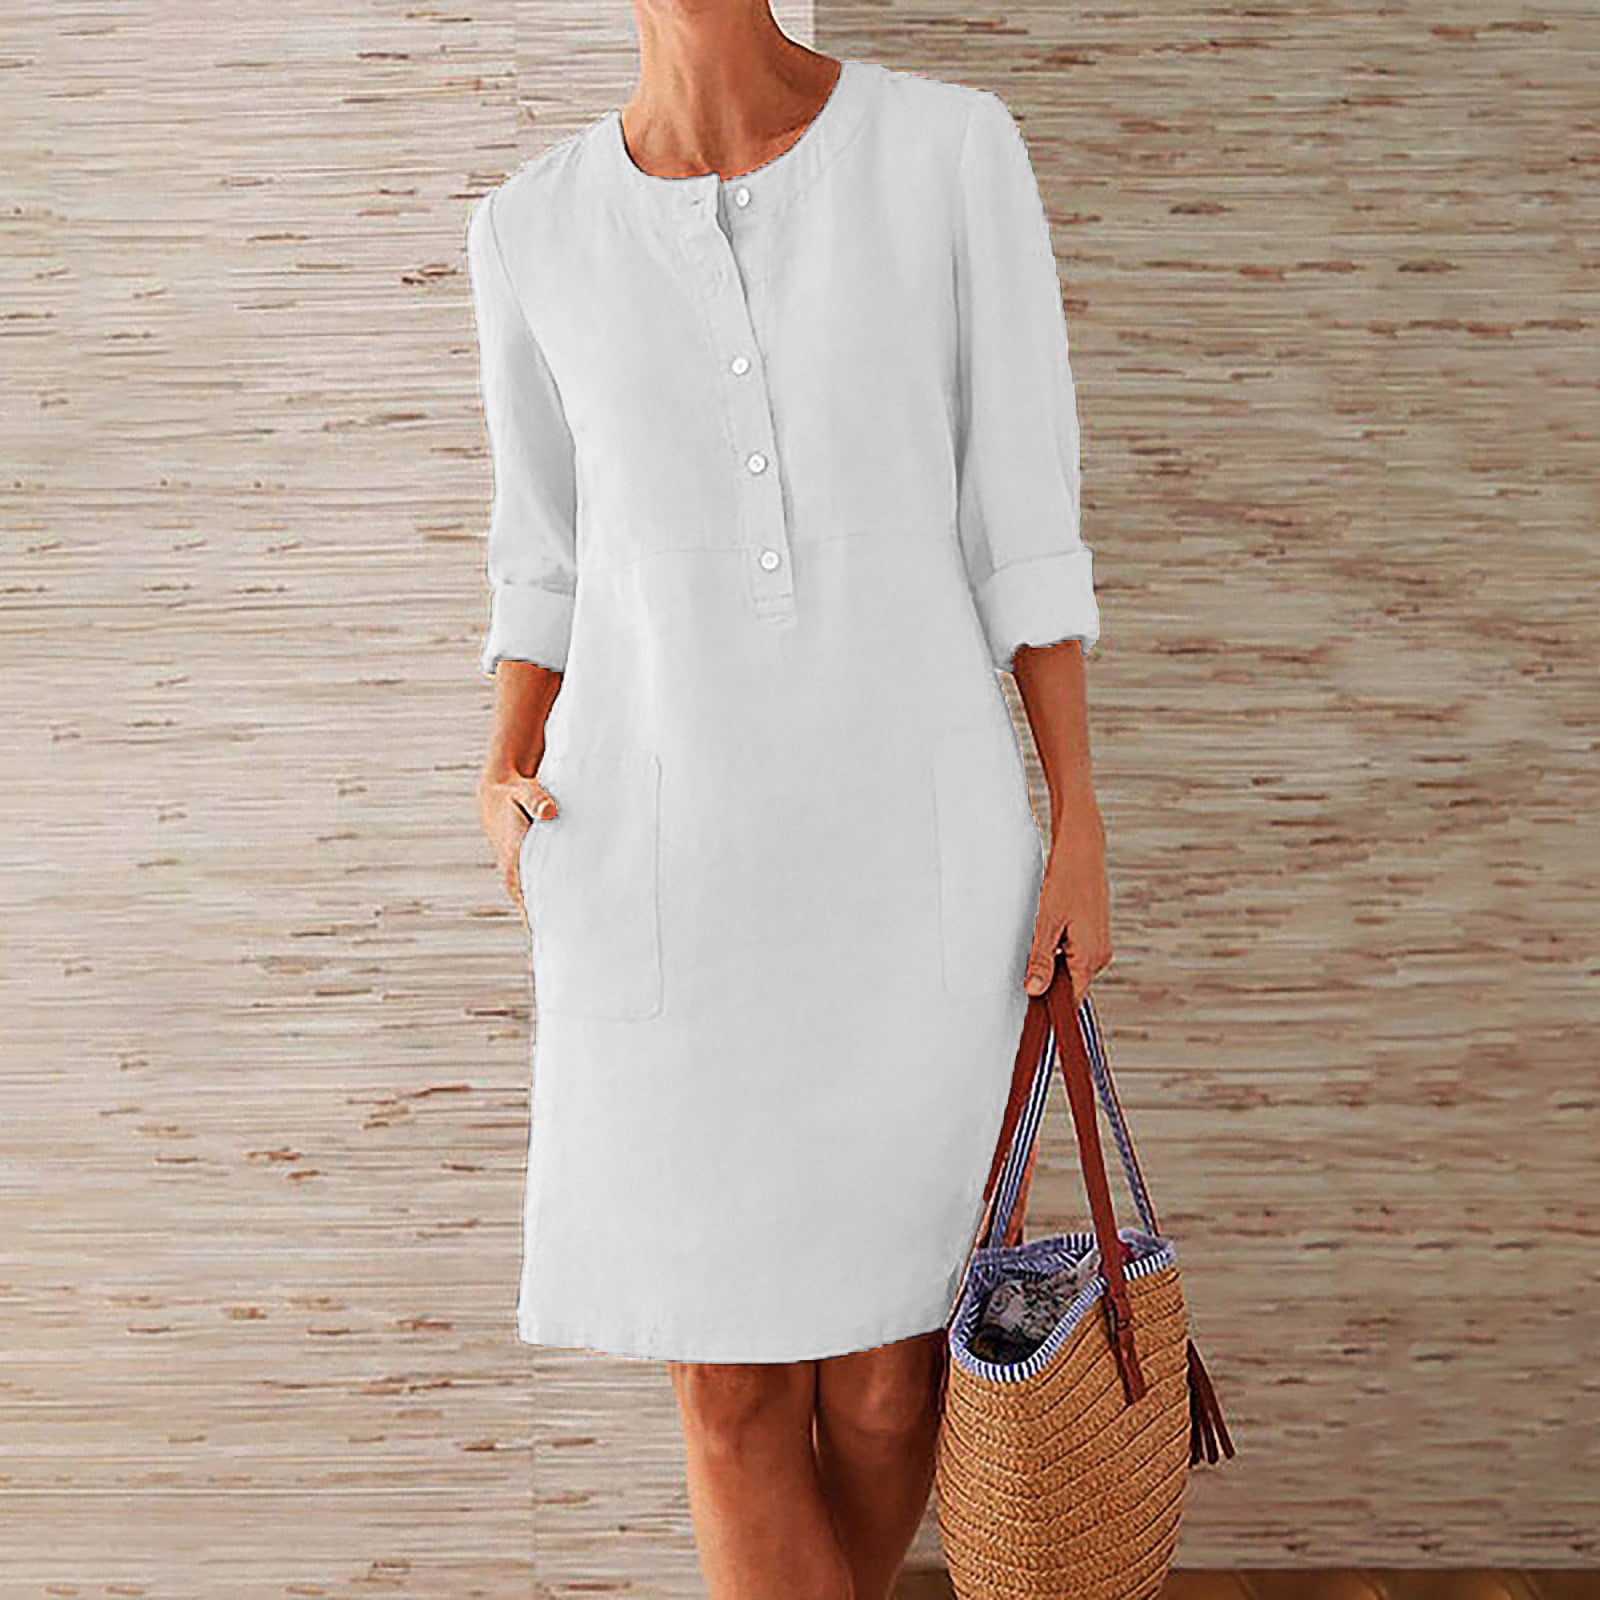 Gotyou Summer Dress Women Fashion Casual Solid Color Button Pocket Long ...